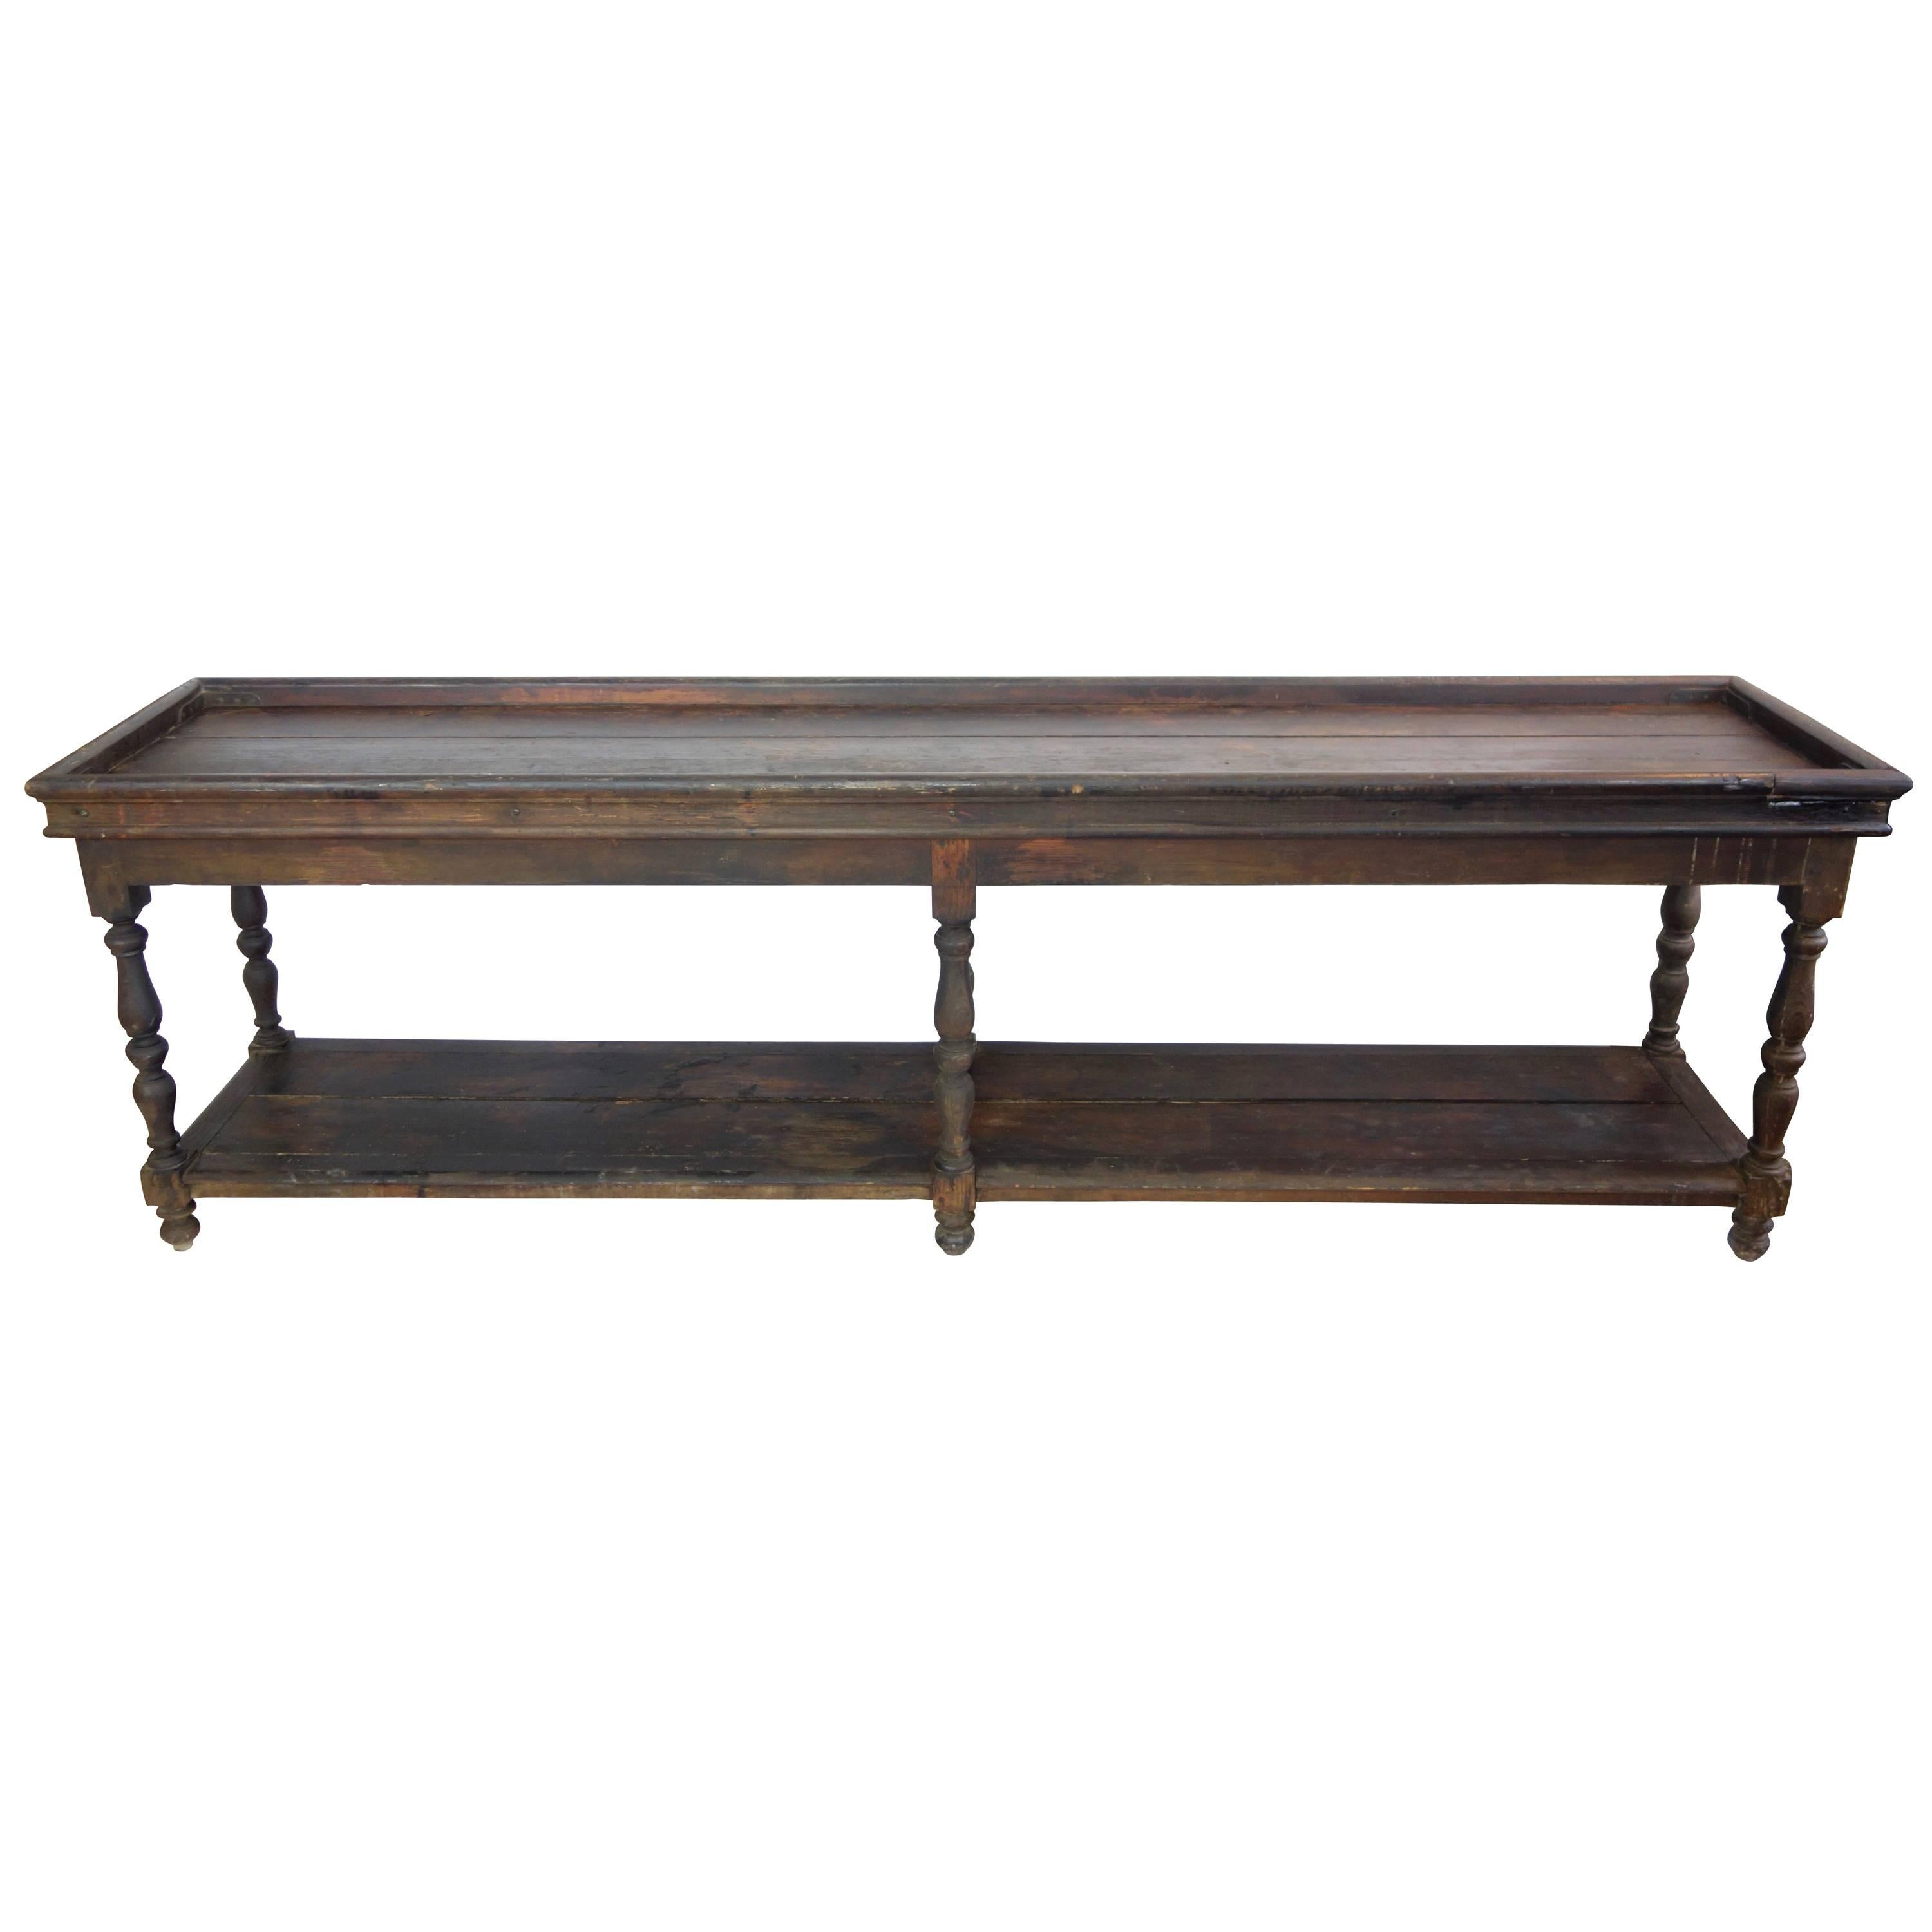 19th Century French Console with Turned Legs